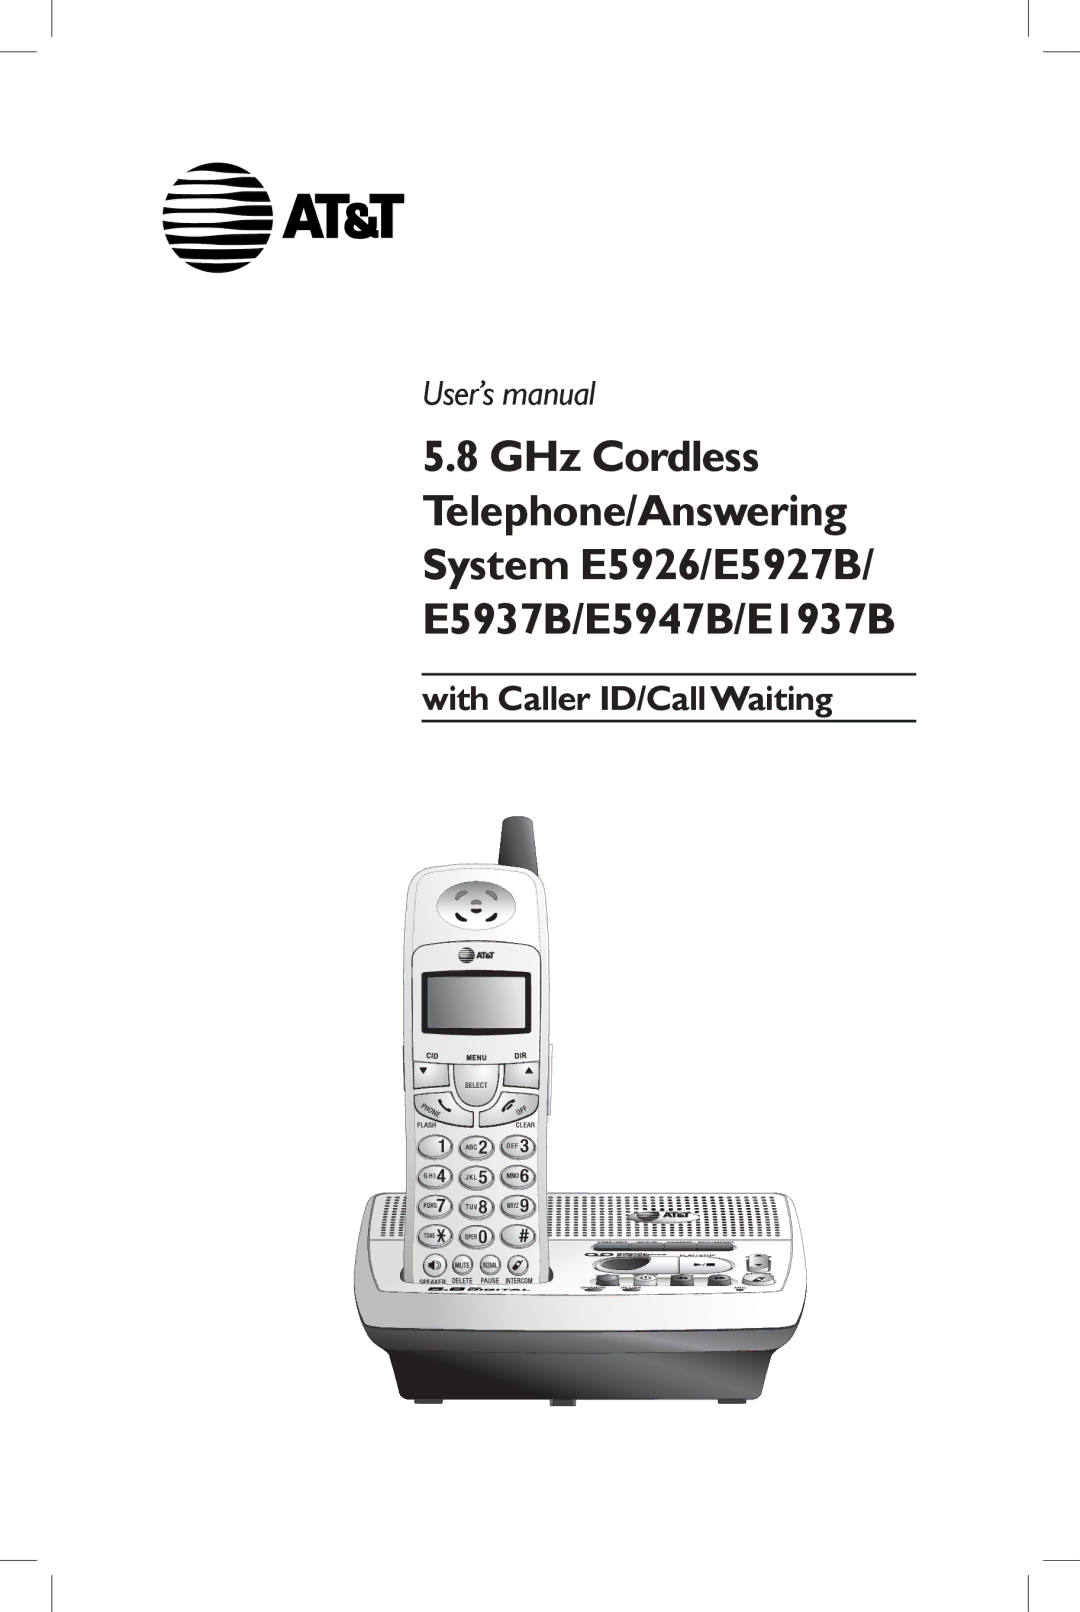 AT&T E5937 user manual With Caller ID/CallWaiting 